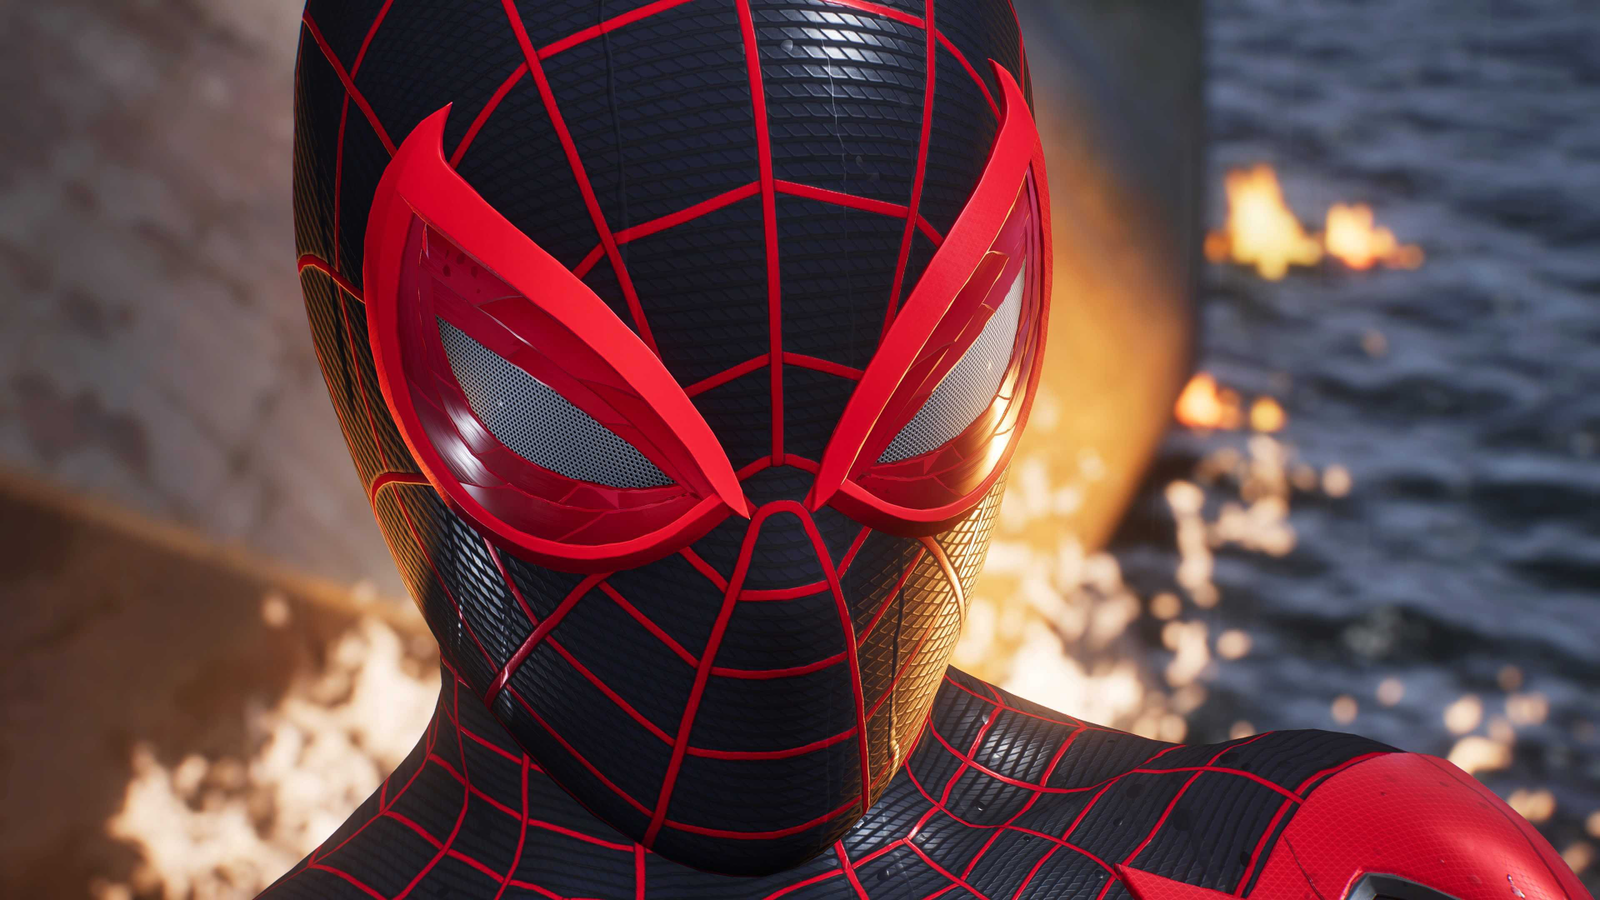 Marvel's Spider-Man 2 Devs Confirm Miles Will be the Main Spider